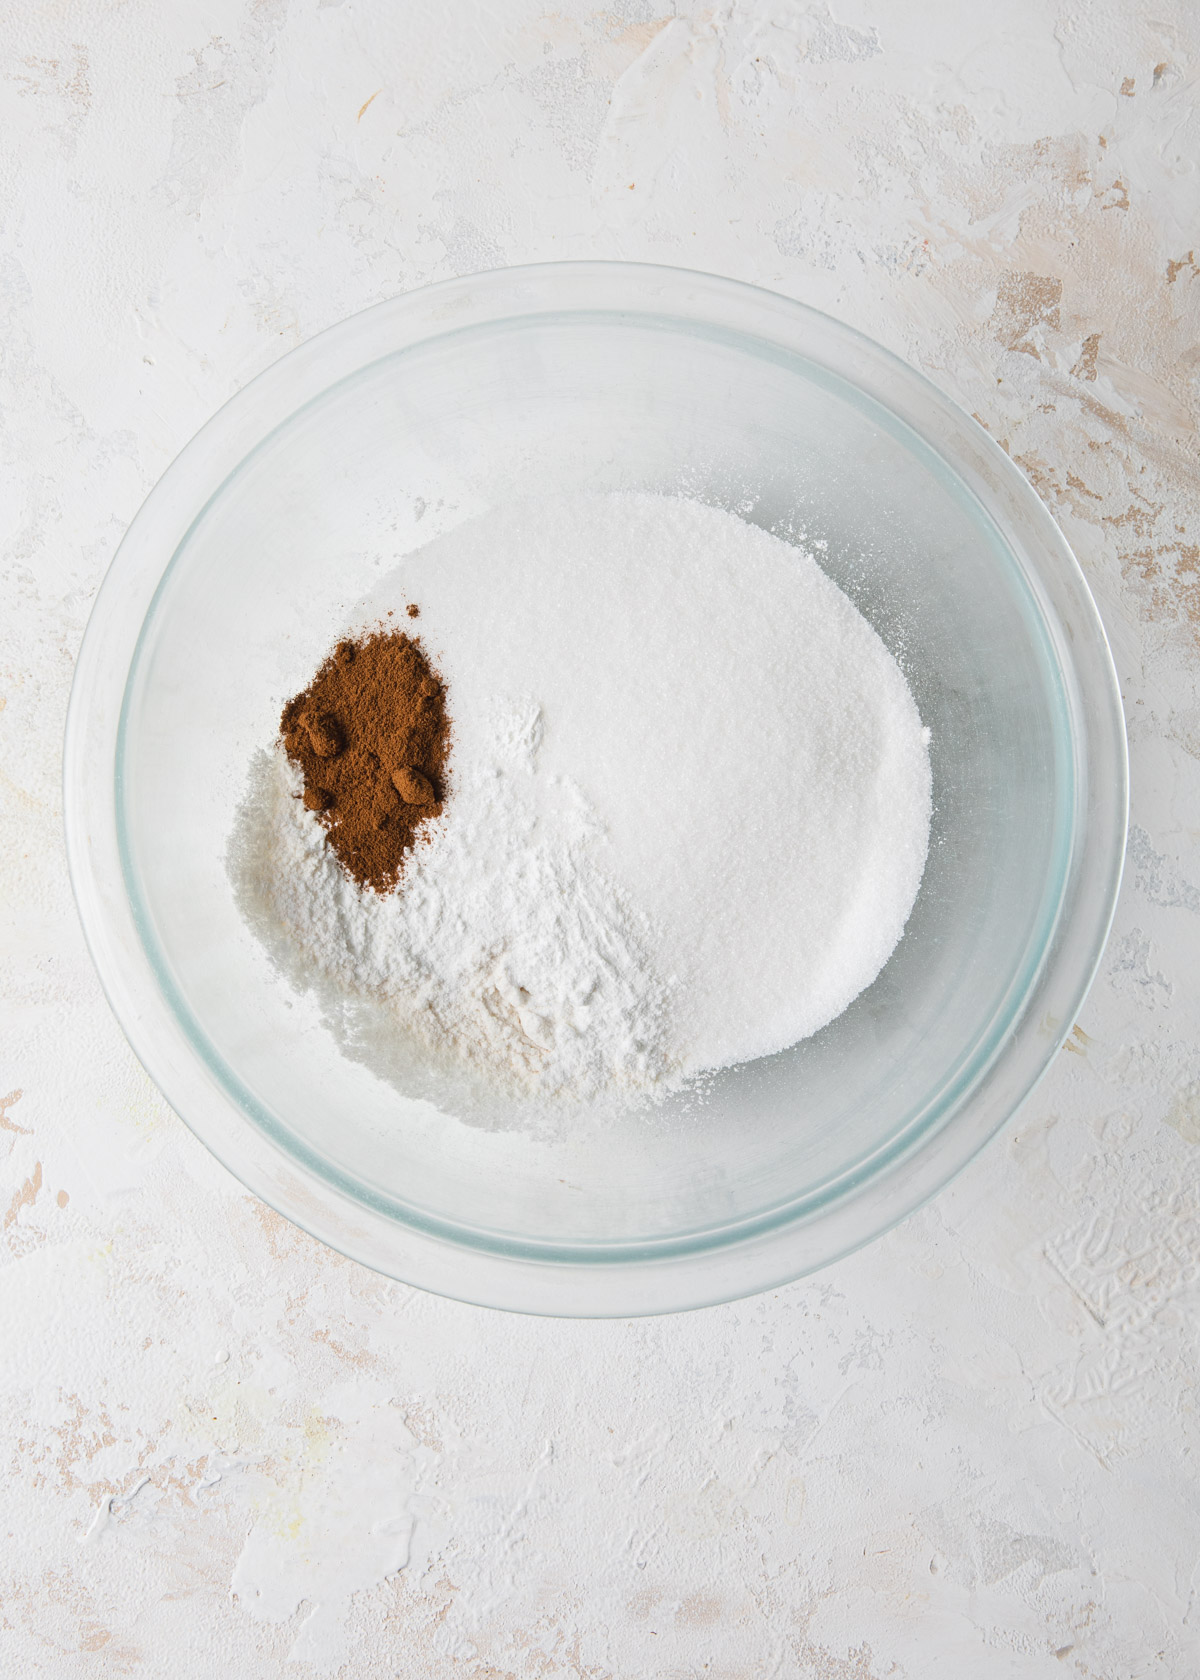 Mixing flour, sugar, instant coffee, baking powder, and salt in a mixing bowl